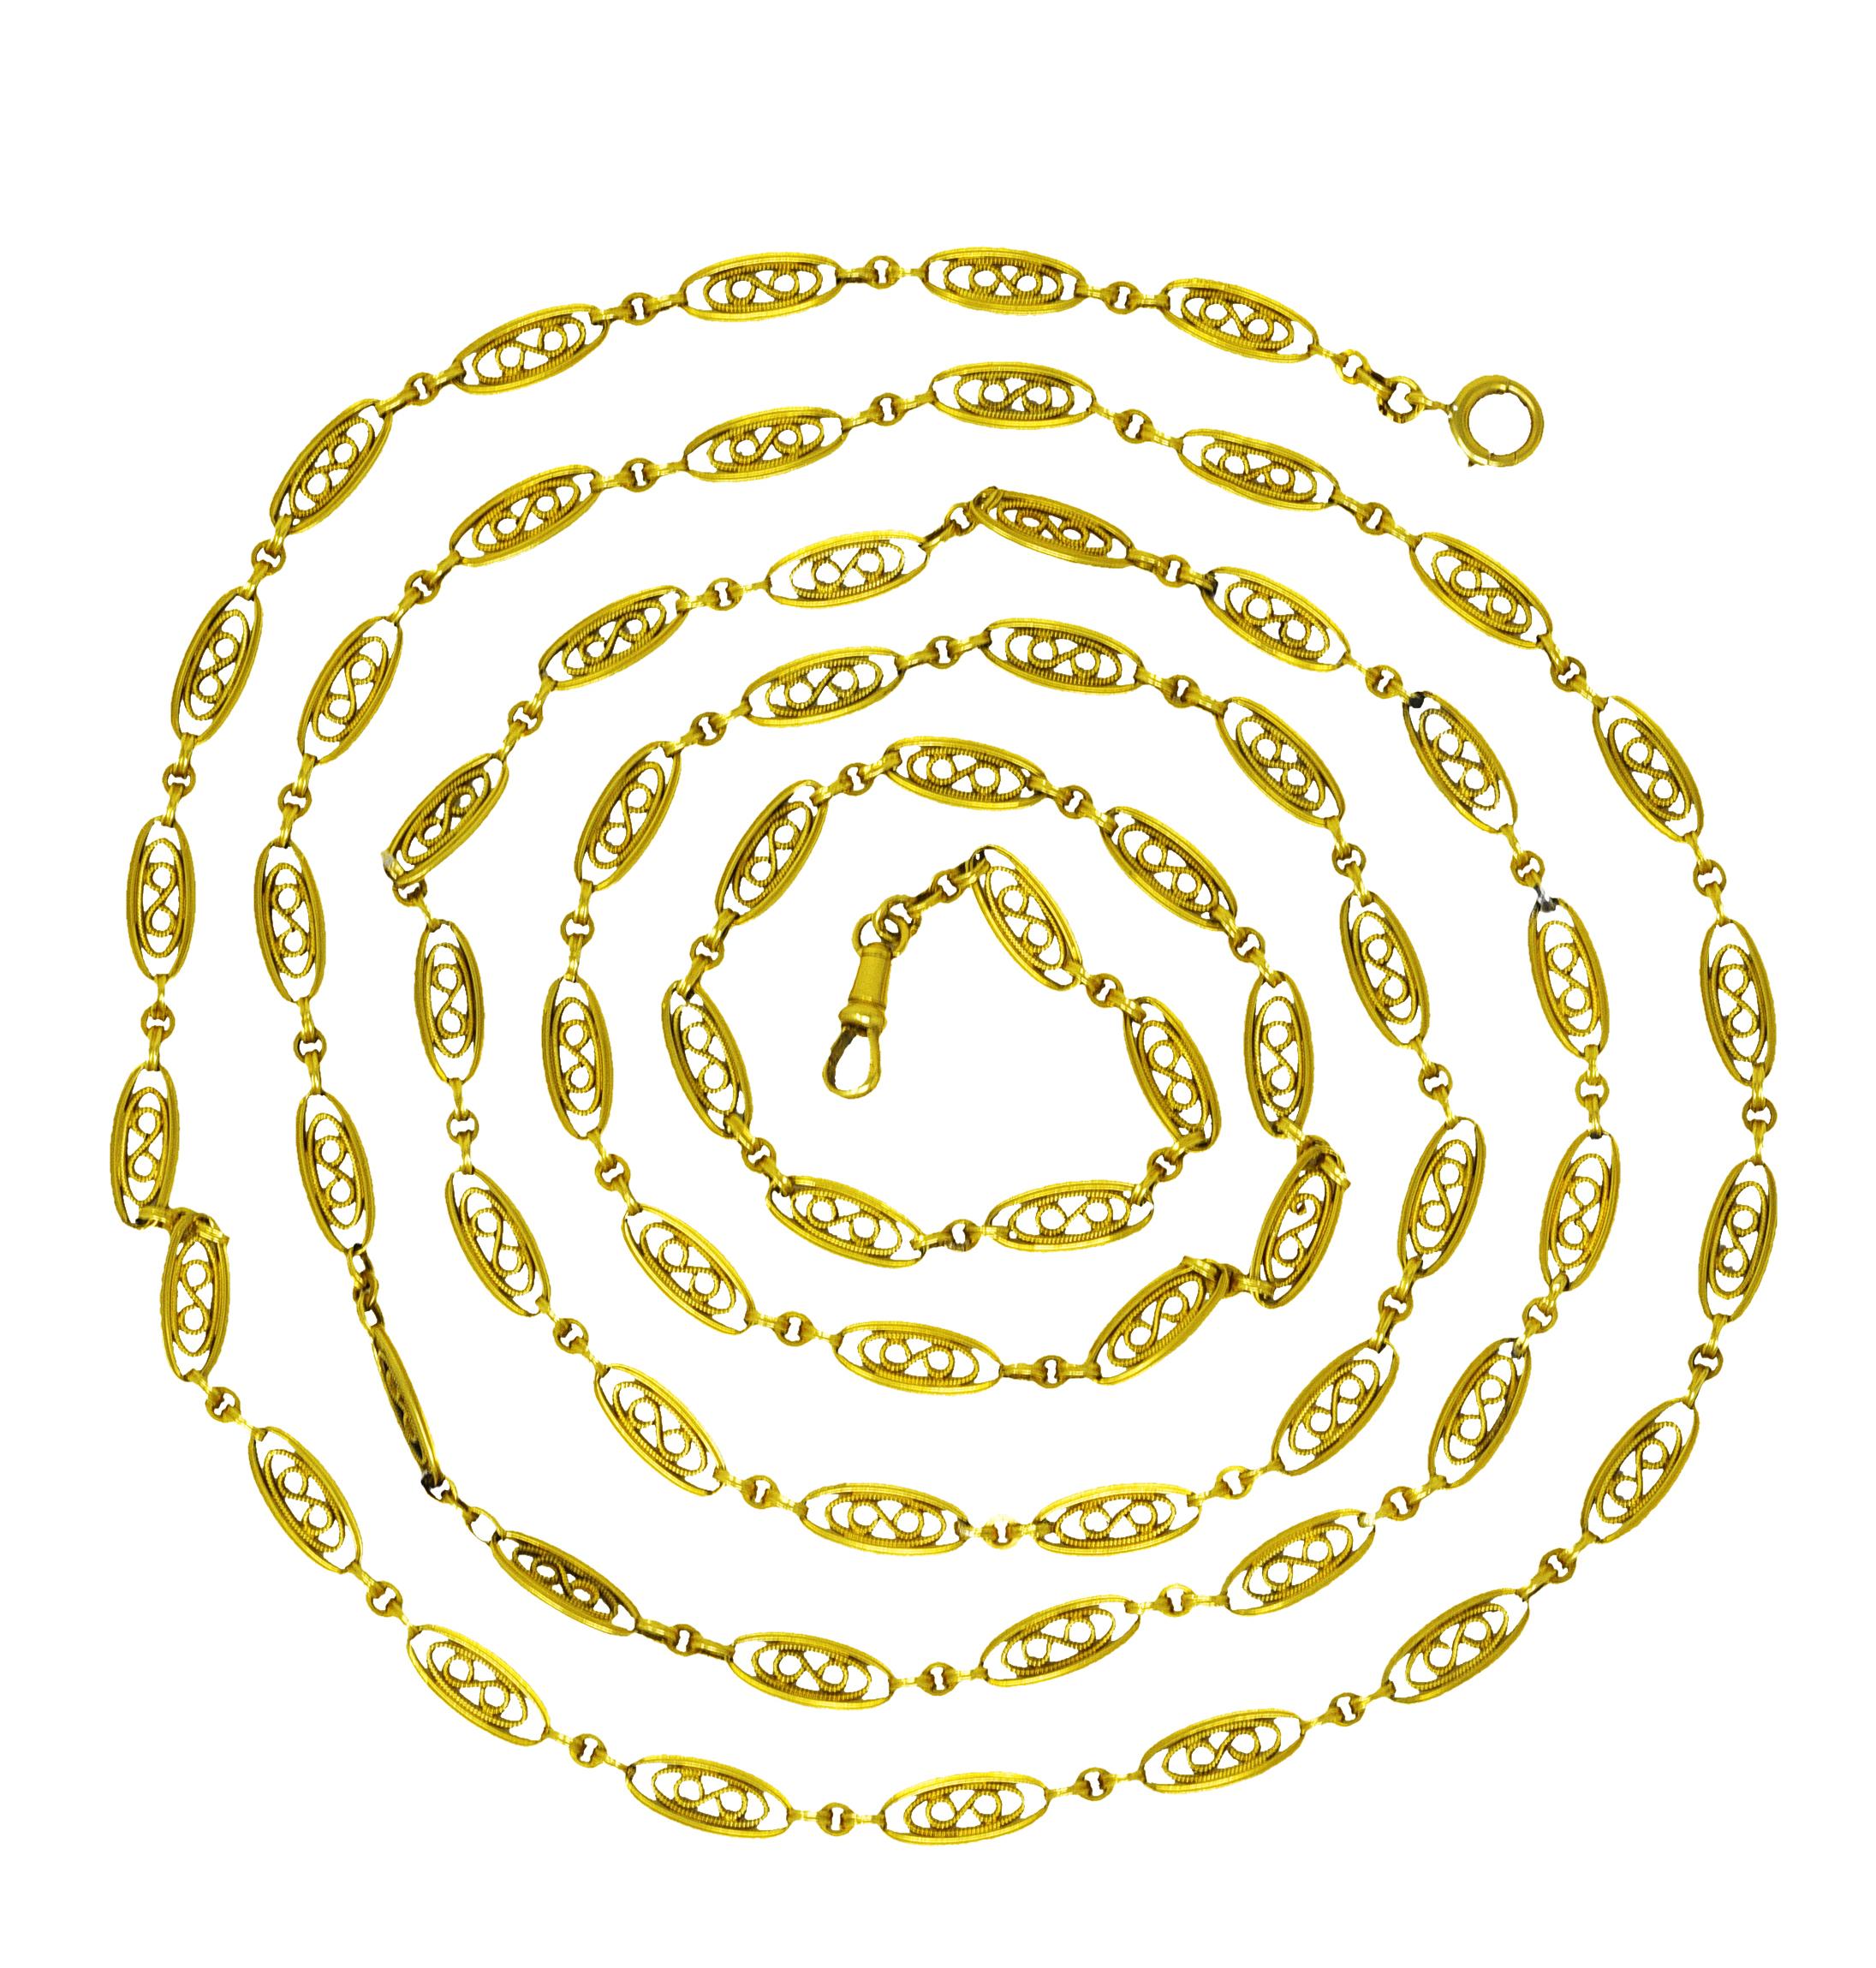 Long chain necklace is comprised of oval links - deeply ridged. And centering scrolled filigree with a milgrain texture. Alternating with ridged and circular spacer links. Terminating as an antique lobster bale. And spring ring clasp closure. With